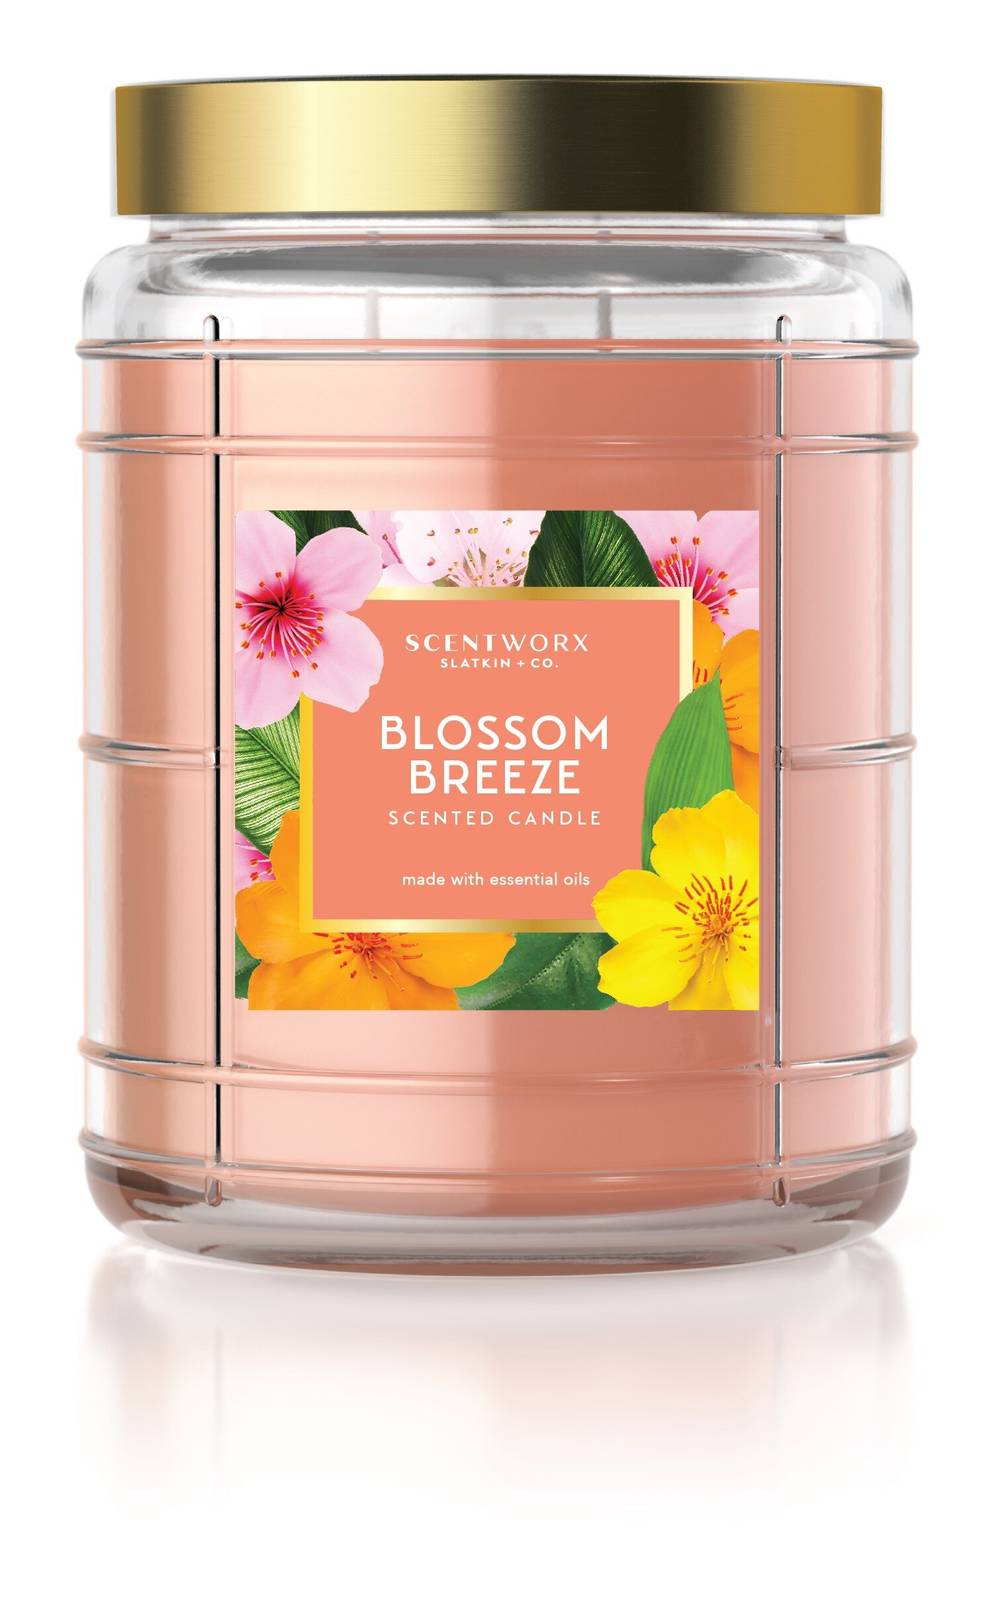 Scentworx Blossom Breeze Candle